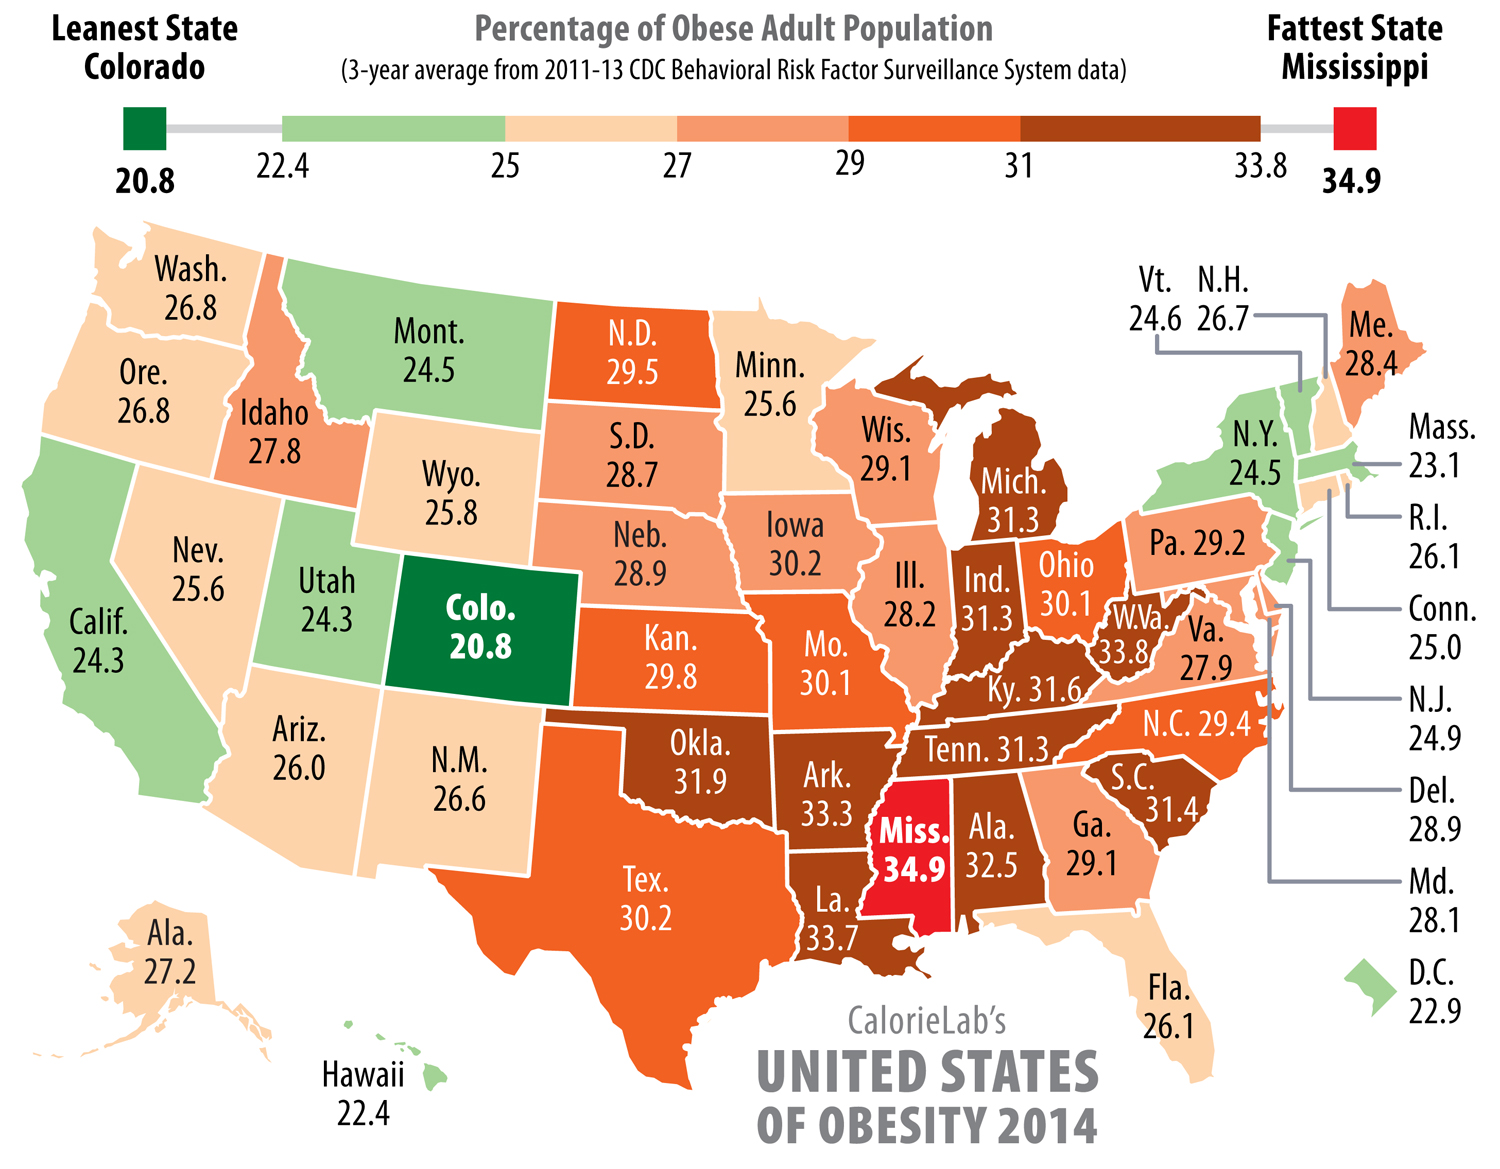 A picture of the United States showing obesity rates per state.